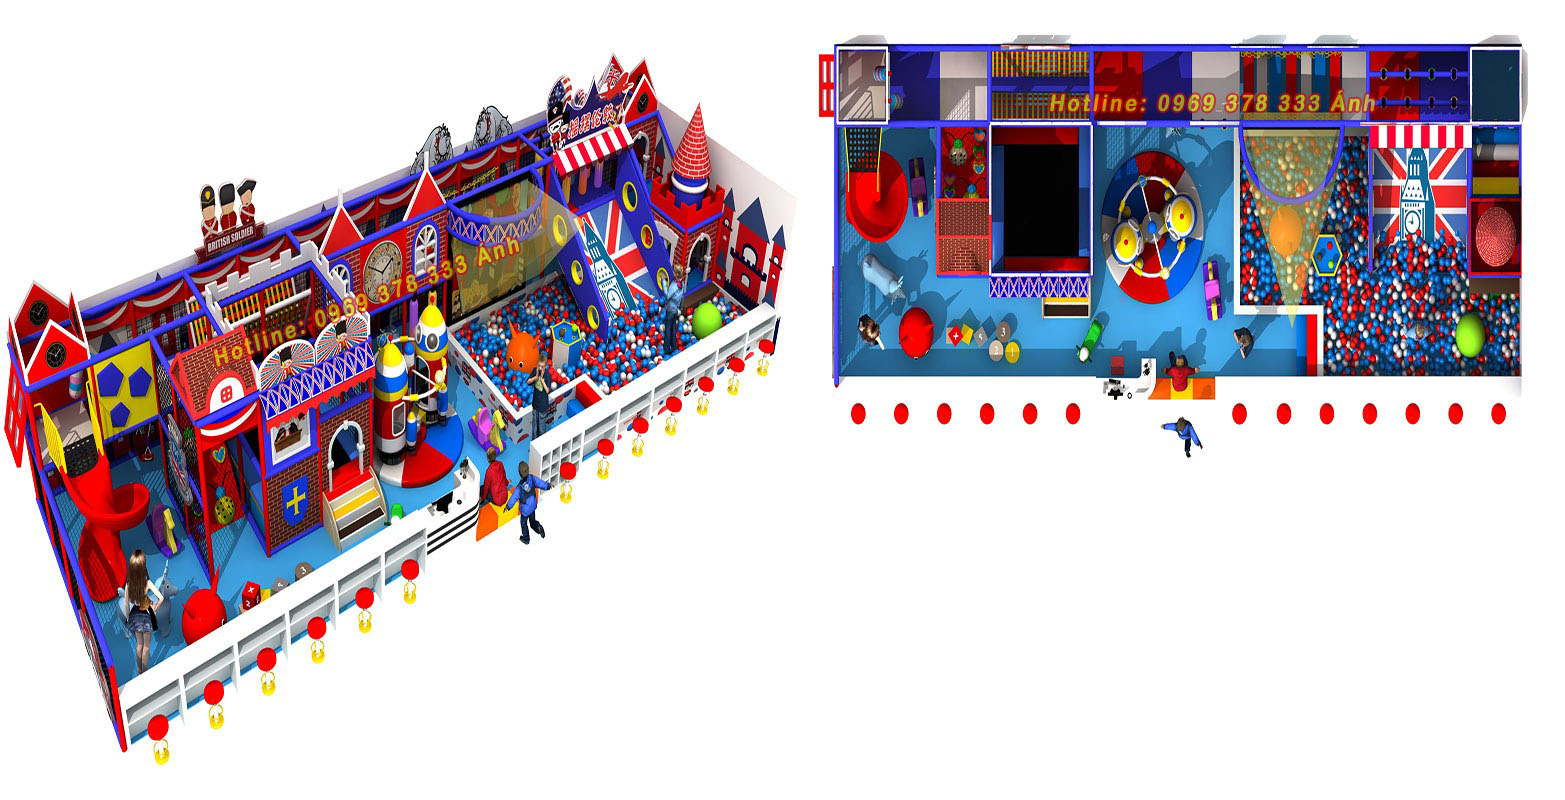 Environmental-protection-new-design-indoor-playground copy